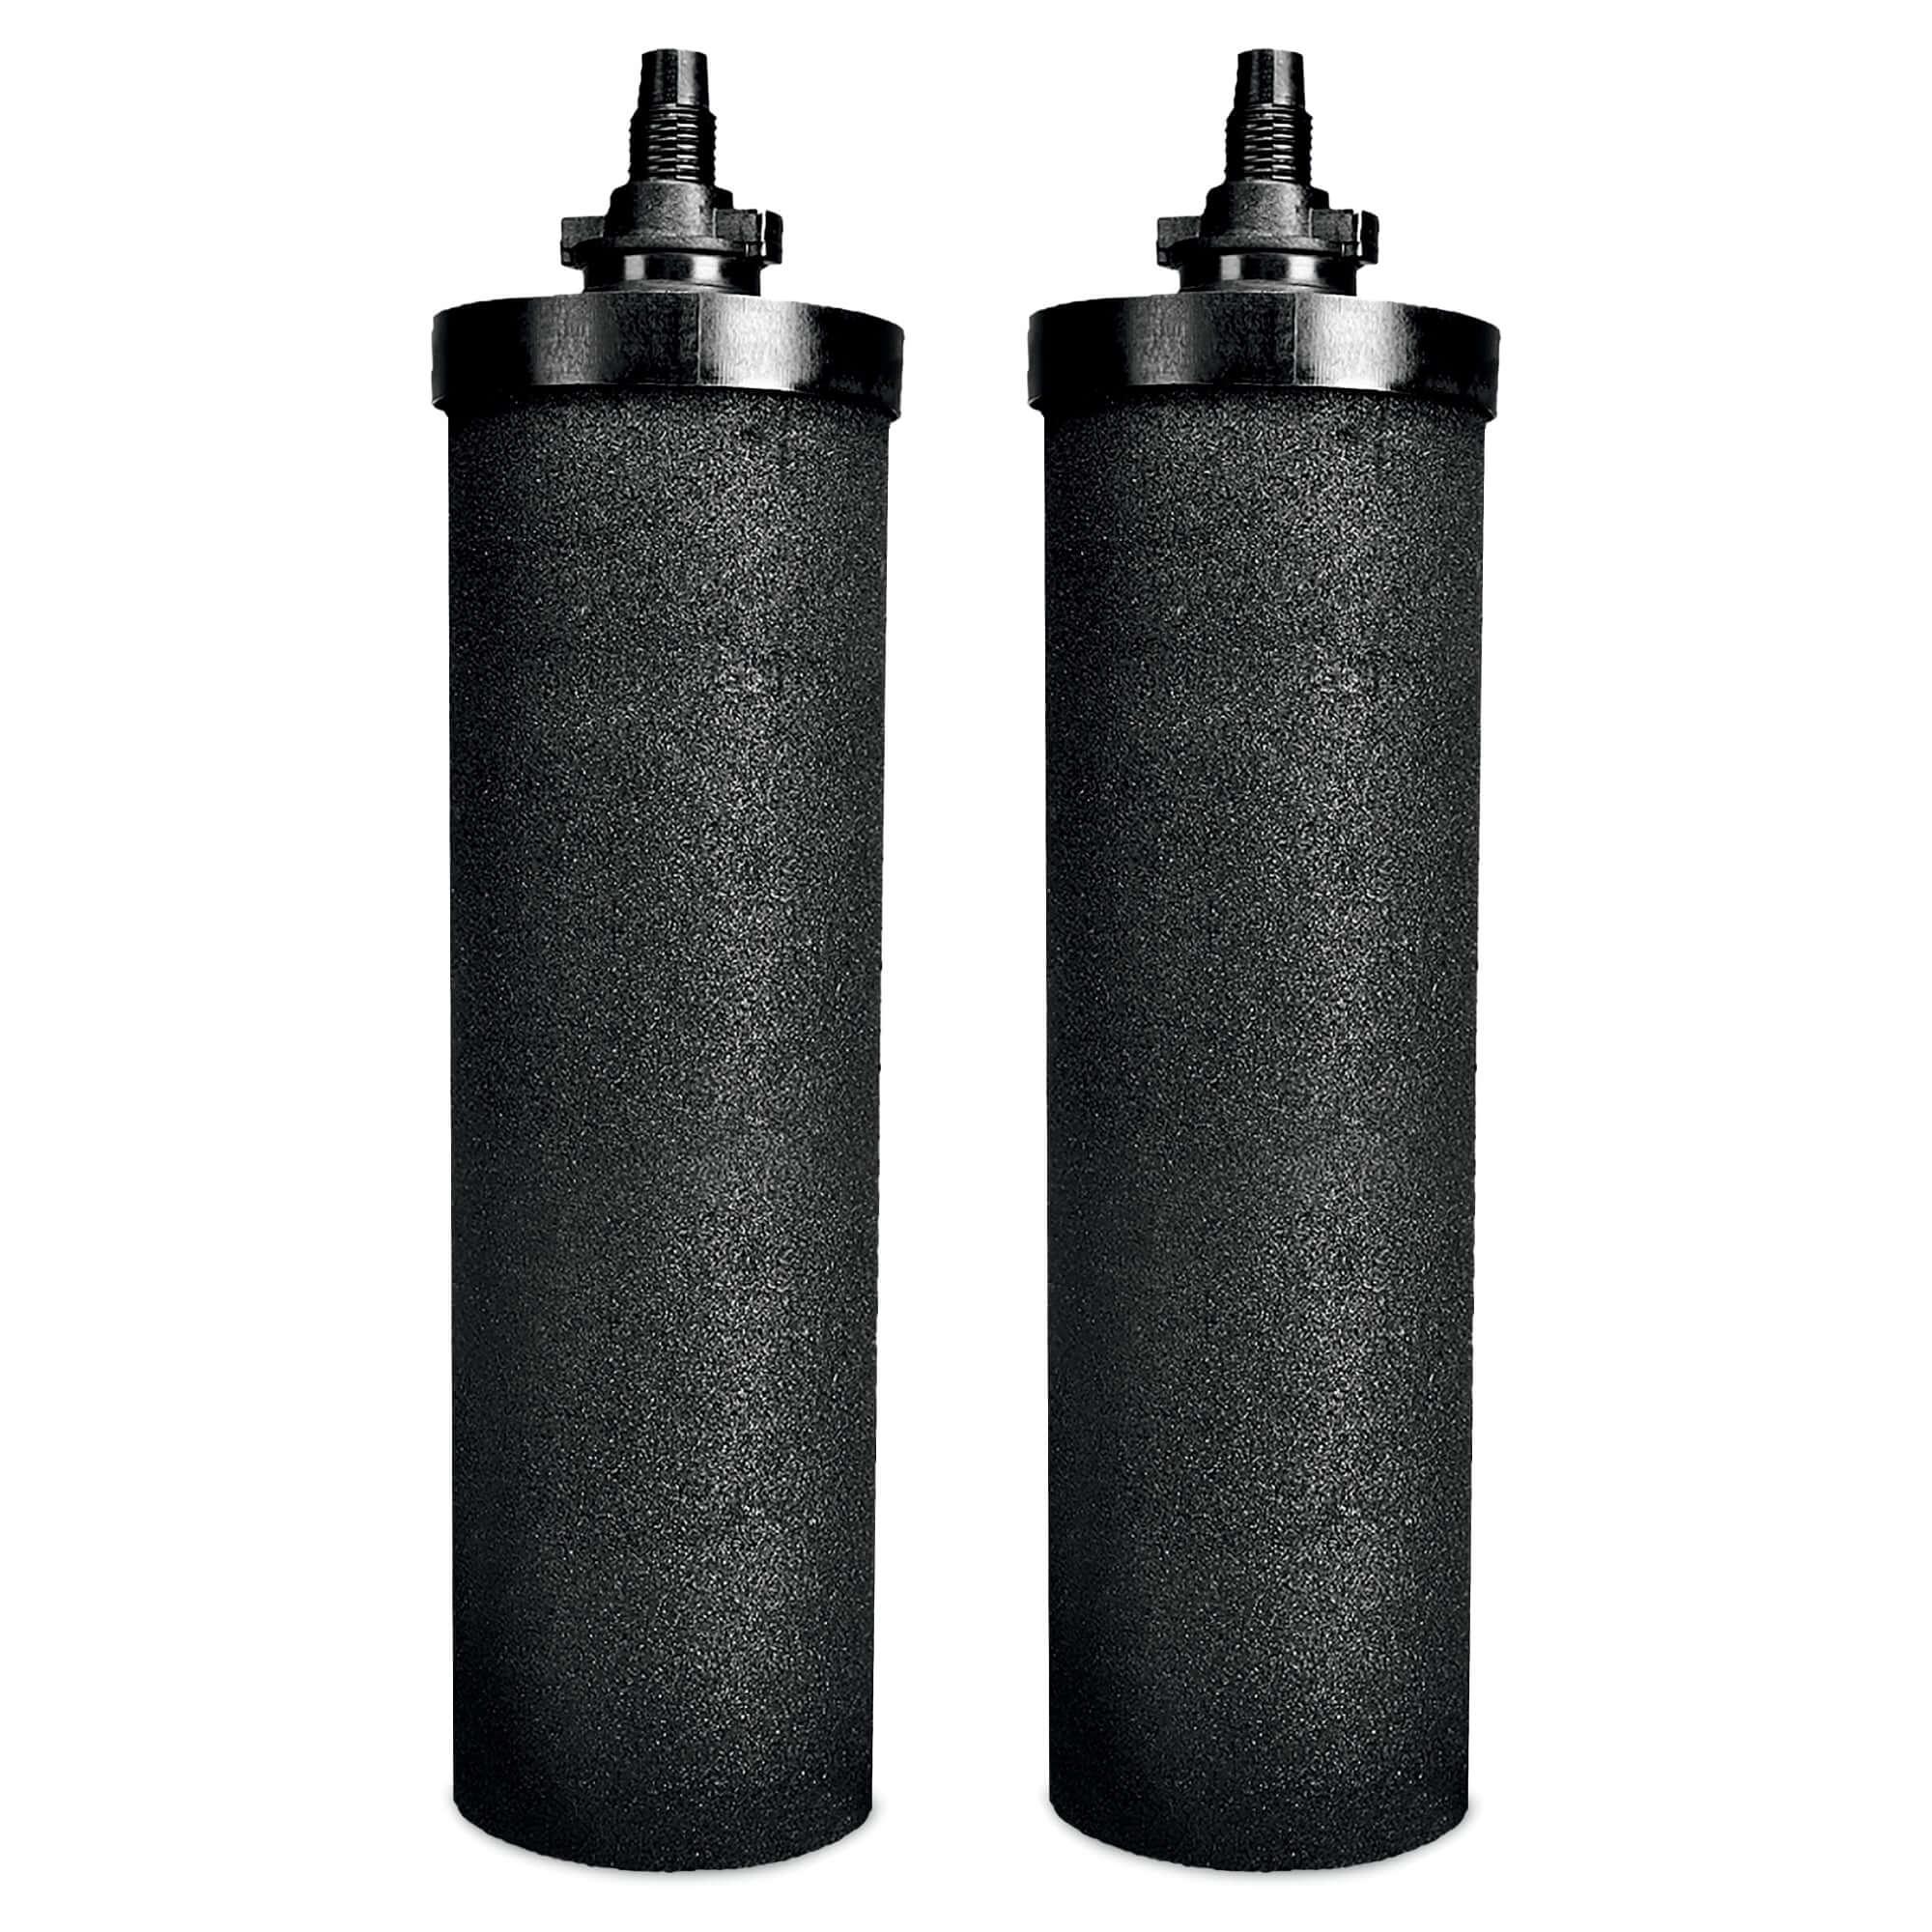 Water Filter With Activated Carbon : 2 RAMA Carbon Candles For